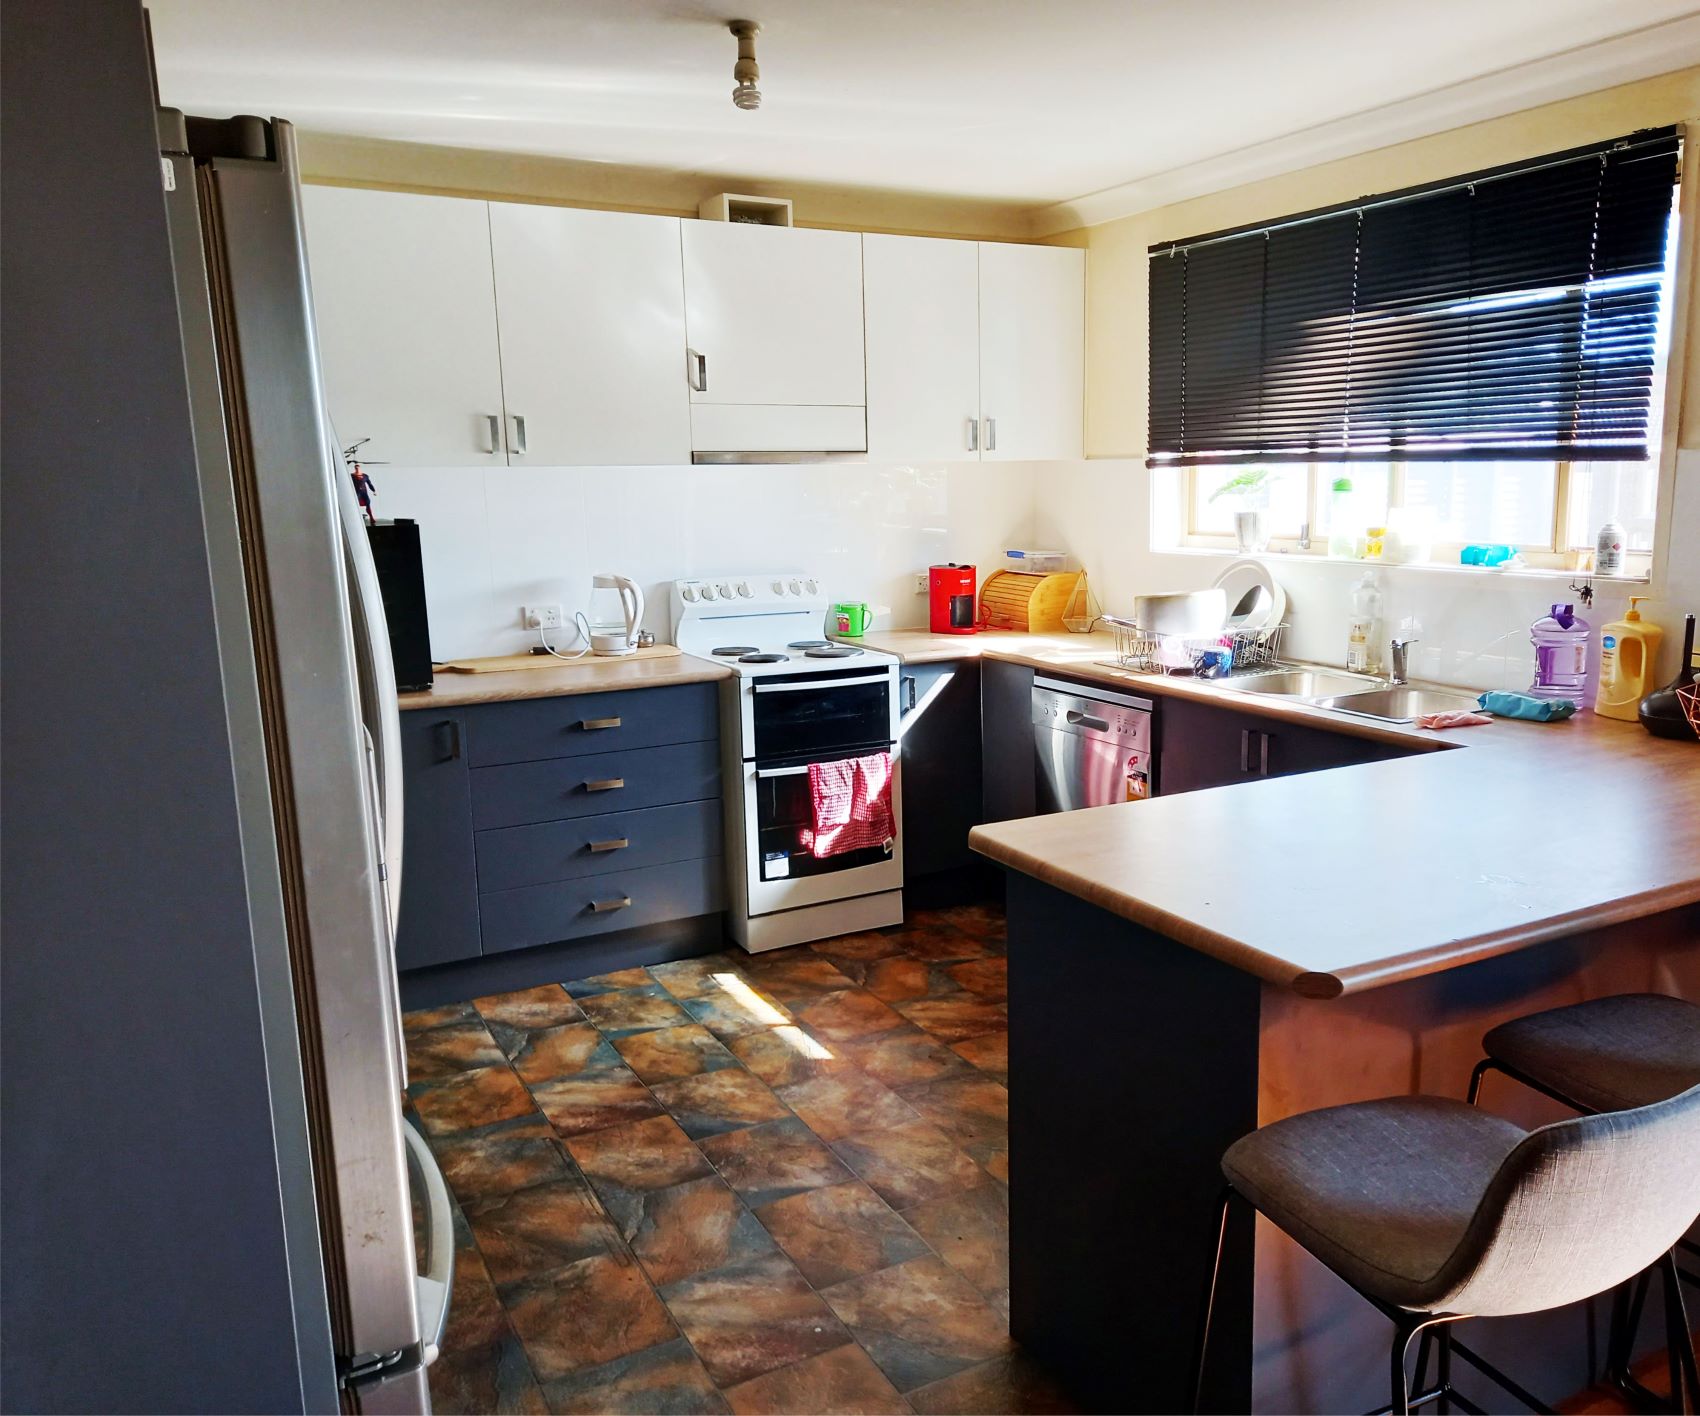 Budget kitchen in Leumeah NSW